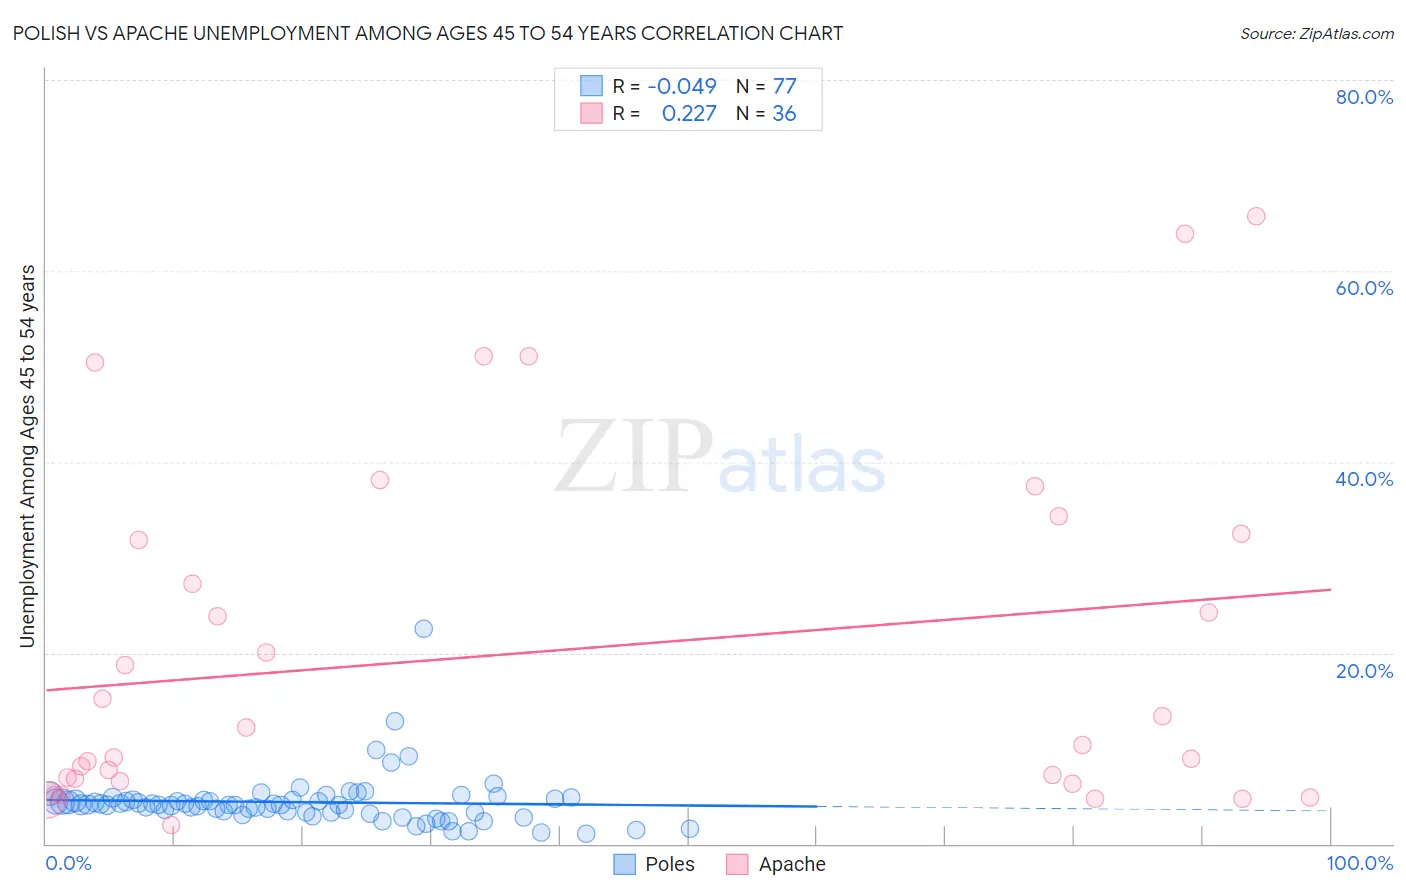 Polish vs Apache Unemployment Among Ages 45 to 54 years